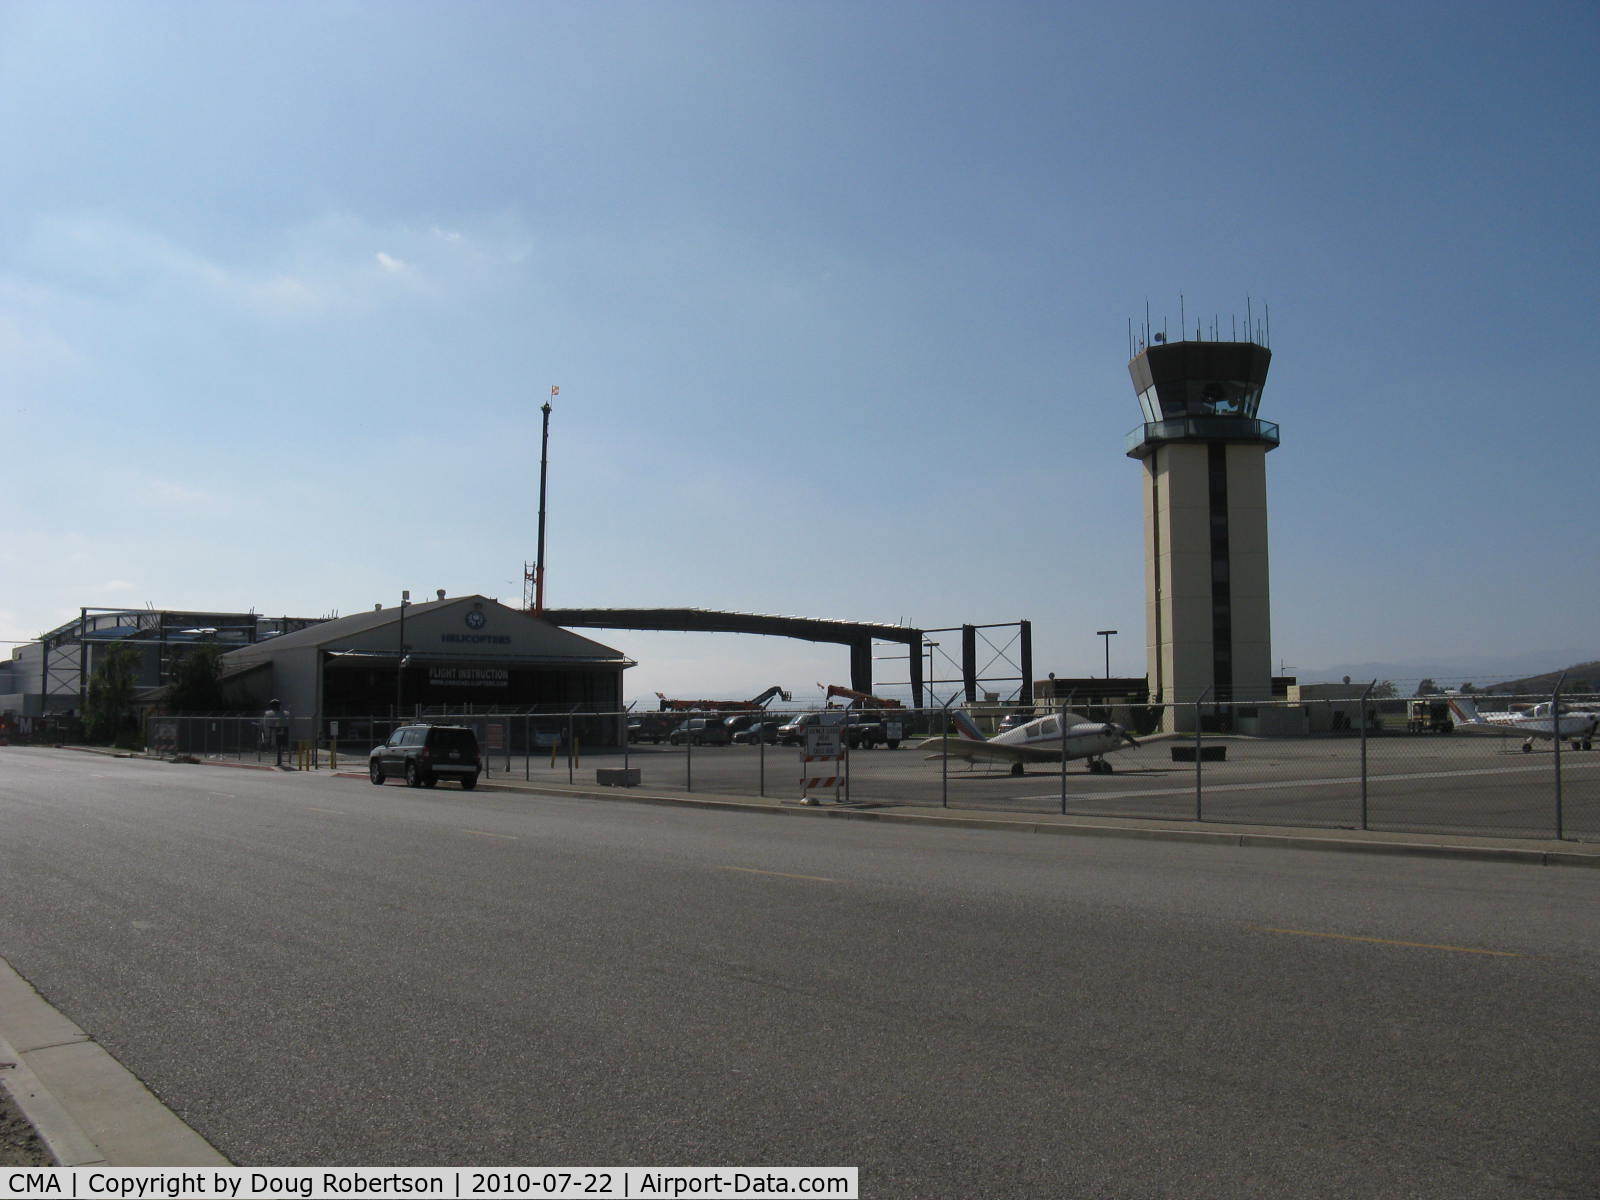 Camarillo Airport (CMA) - Two new large hangars under construction near the Air Traffic Control Tower will add 45,000 square feet of space to SUN AIR JETS.